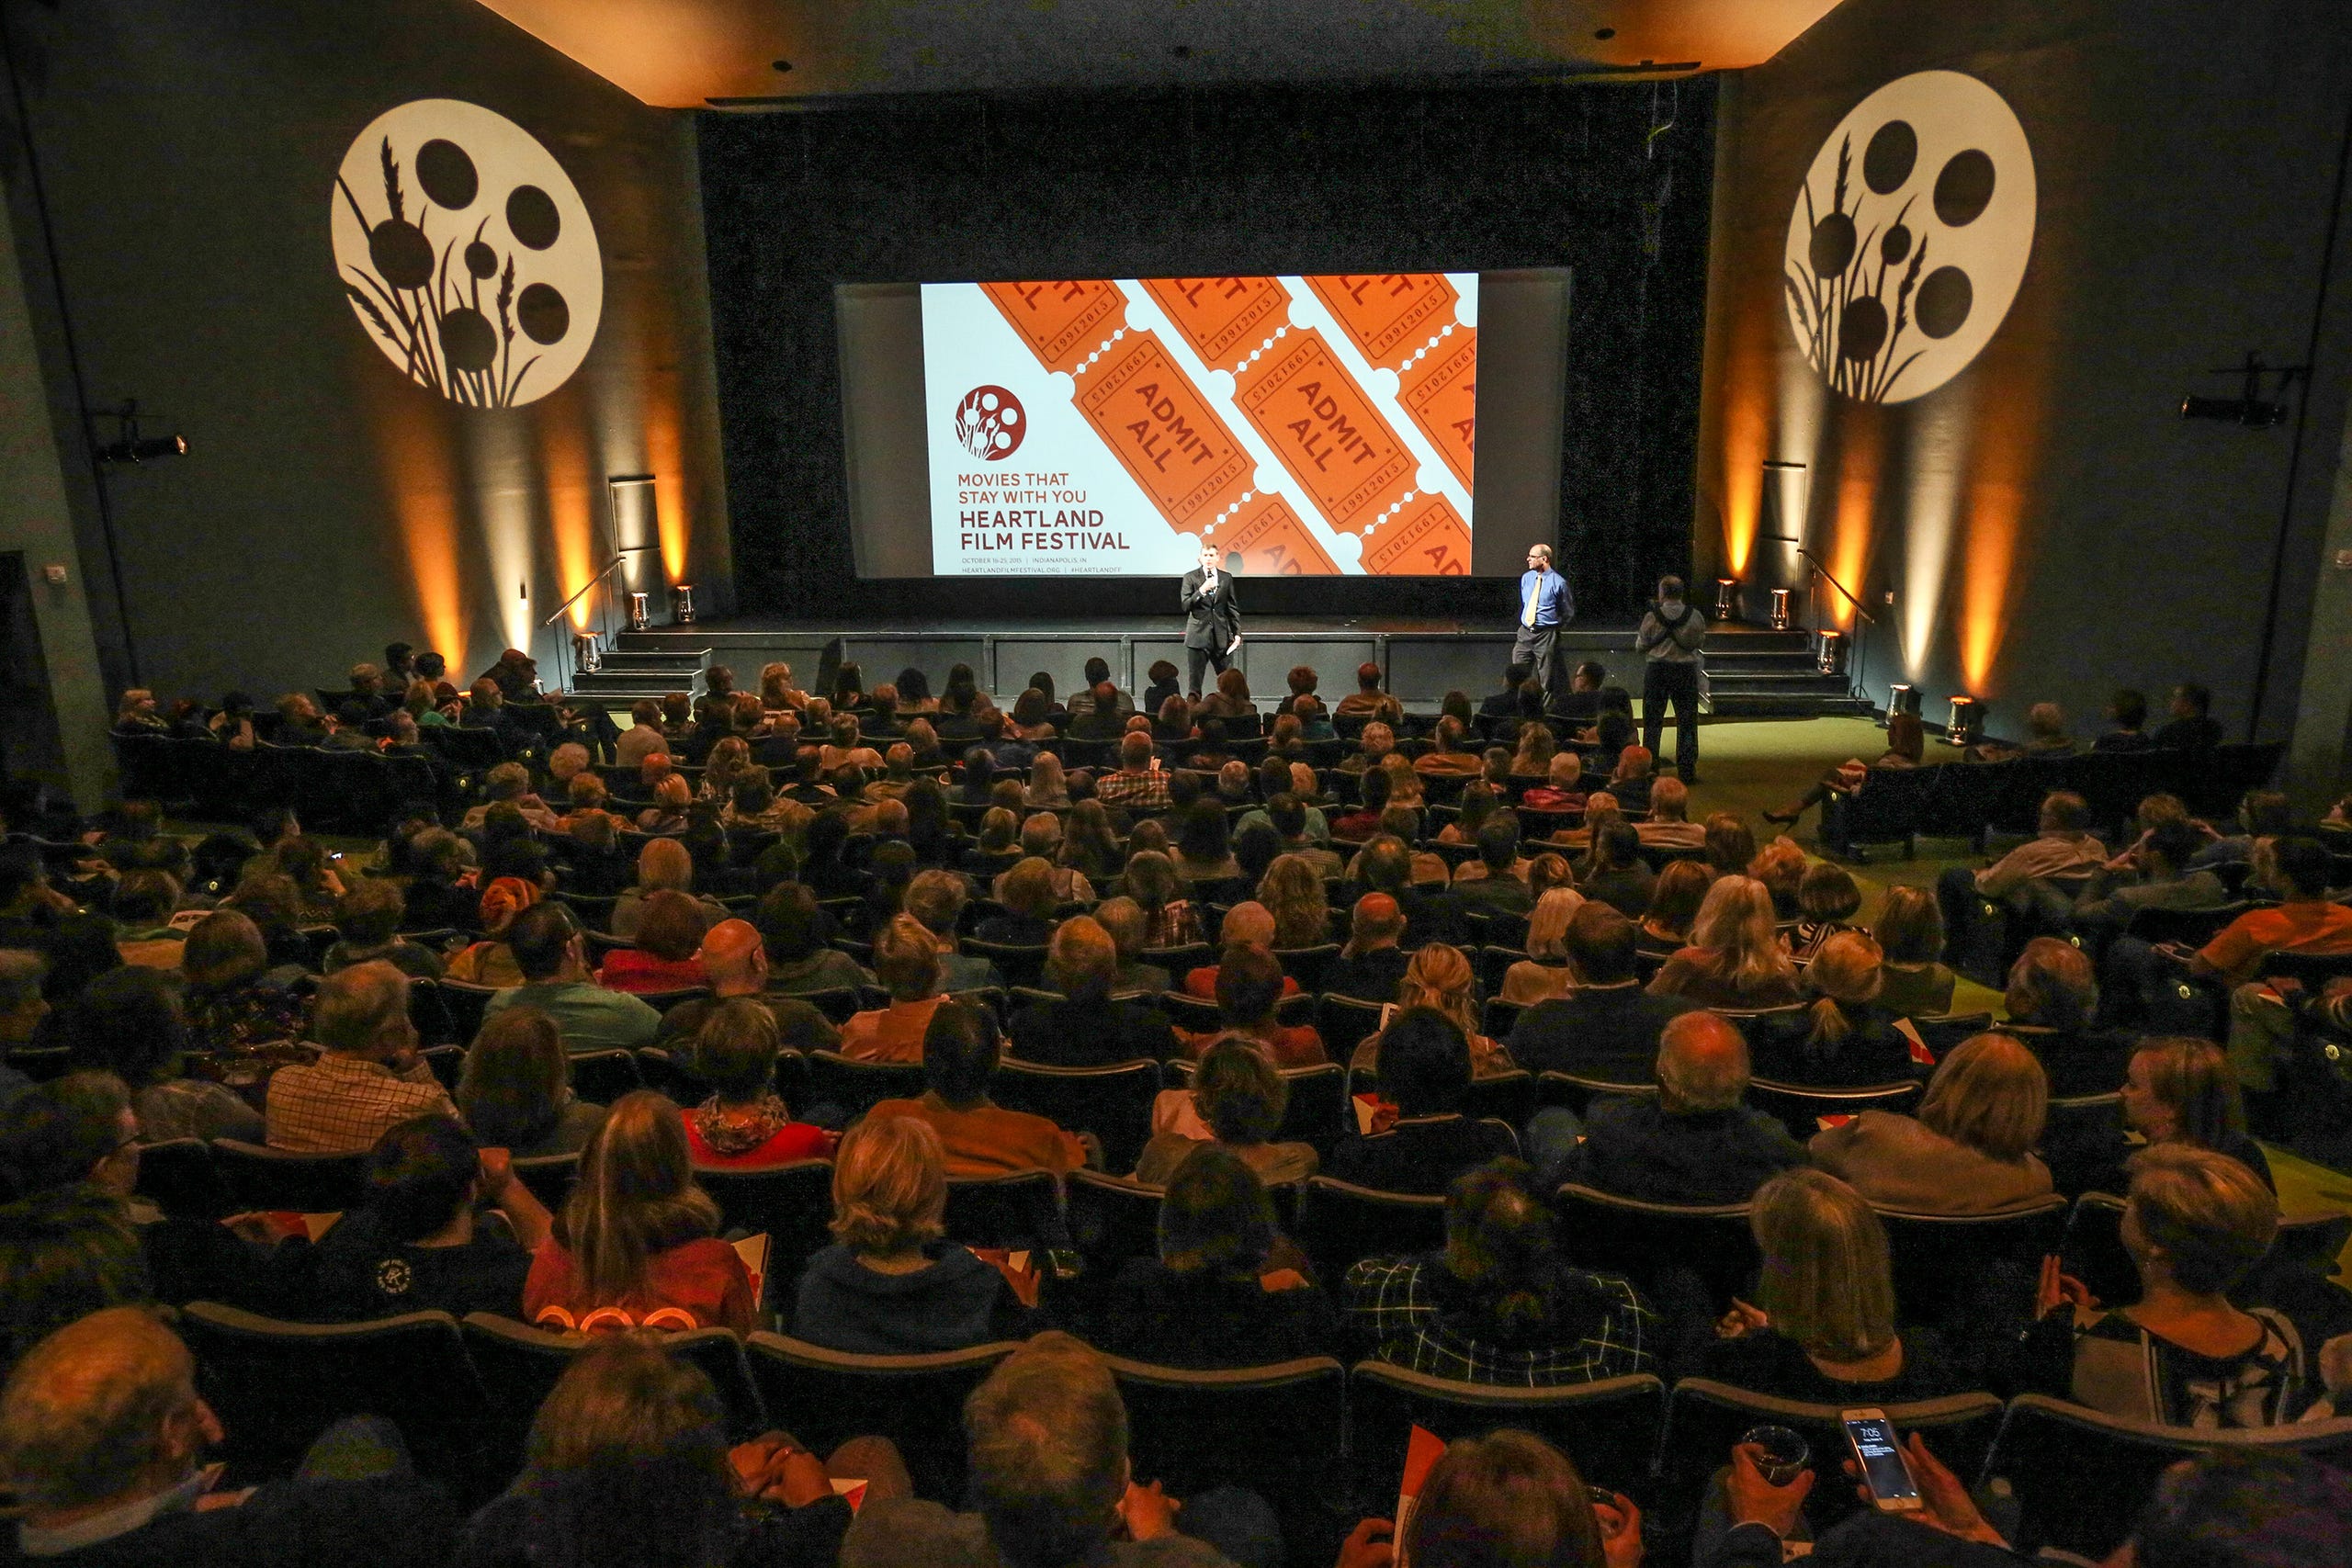 View from the back of a movie theater. The seats are filled with people. A person is talking at the front of the theater and the screen has graphics of tickets and the Heartland Film Festival logo. 